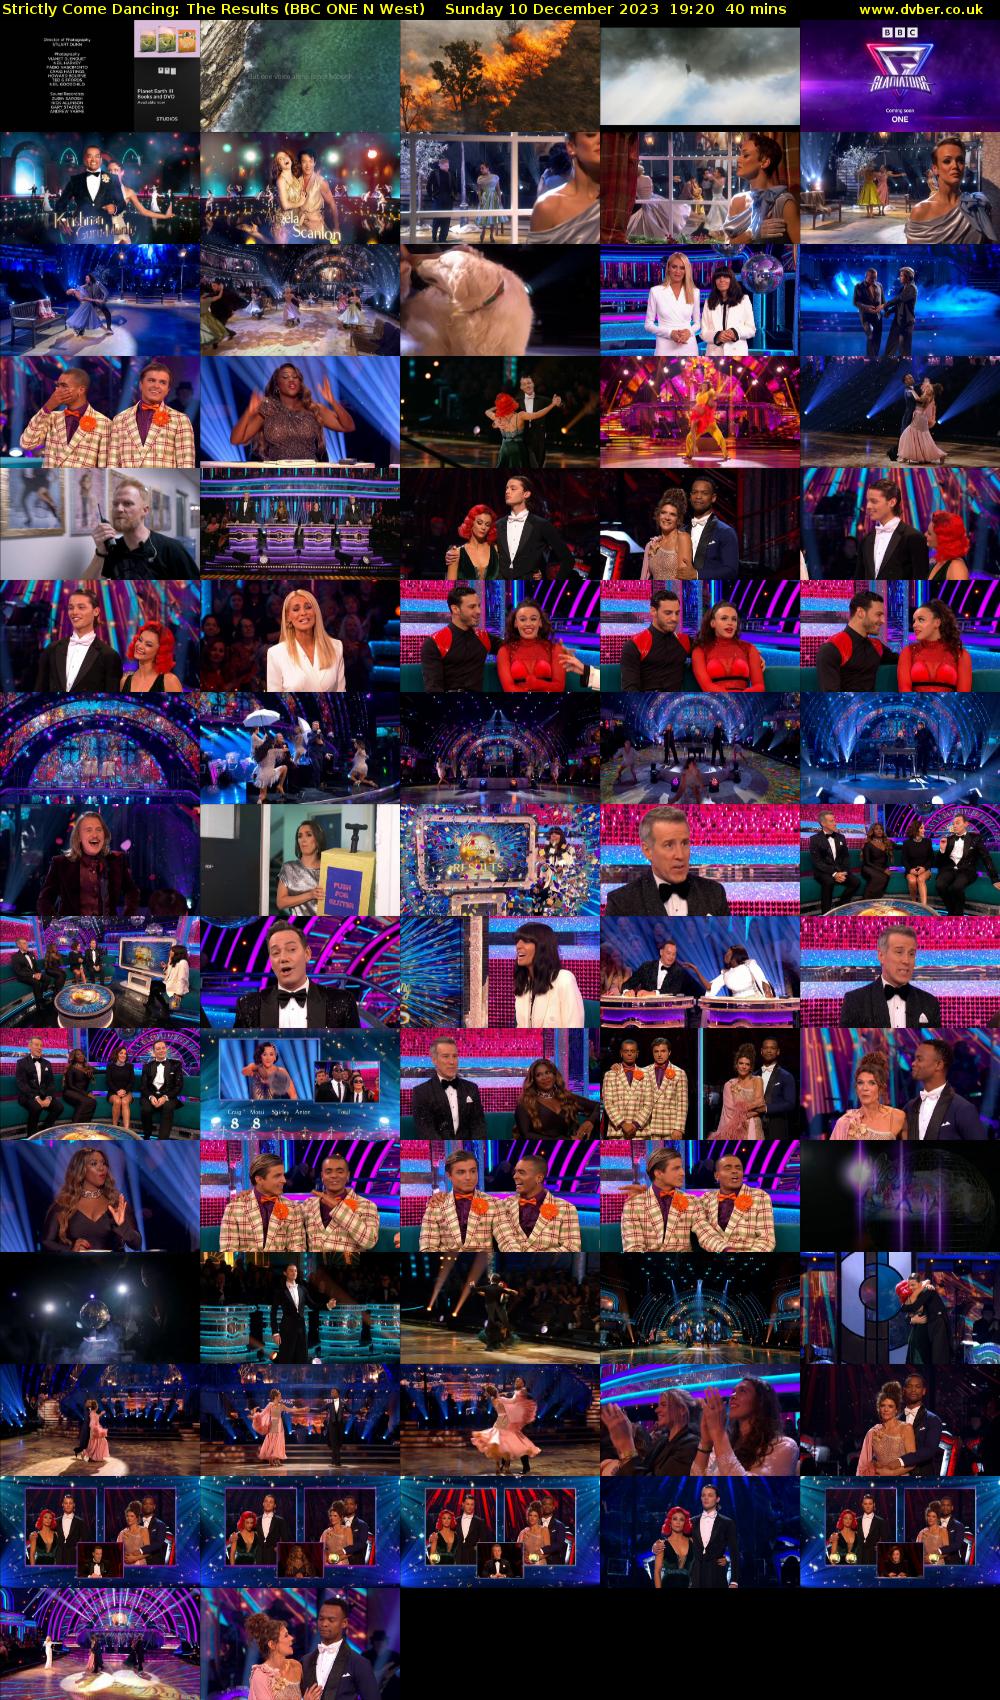 Strictly Come Dancing: The Results (BBC ONE N West) Sunday 10 December 2023 19:20 - 20:00